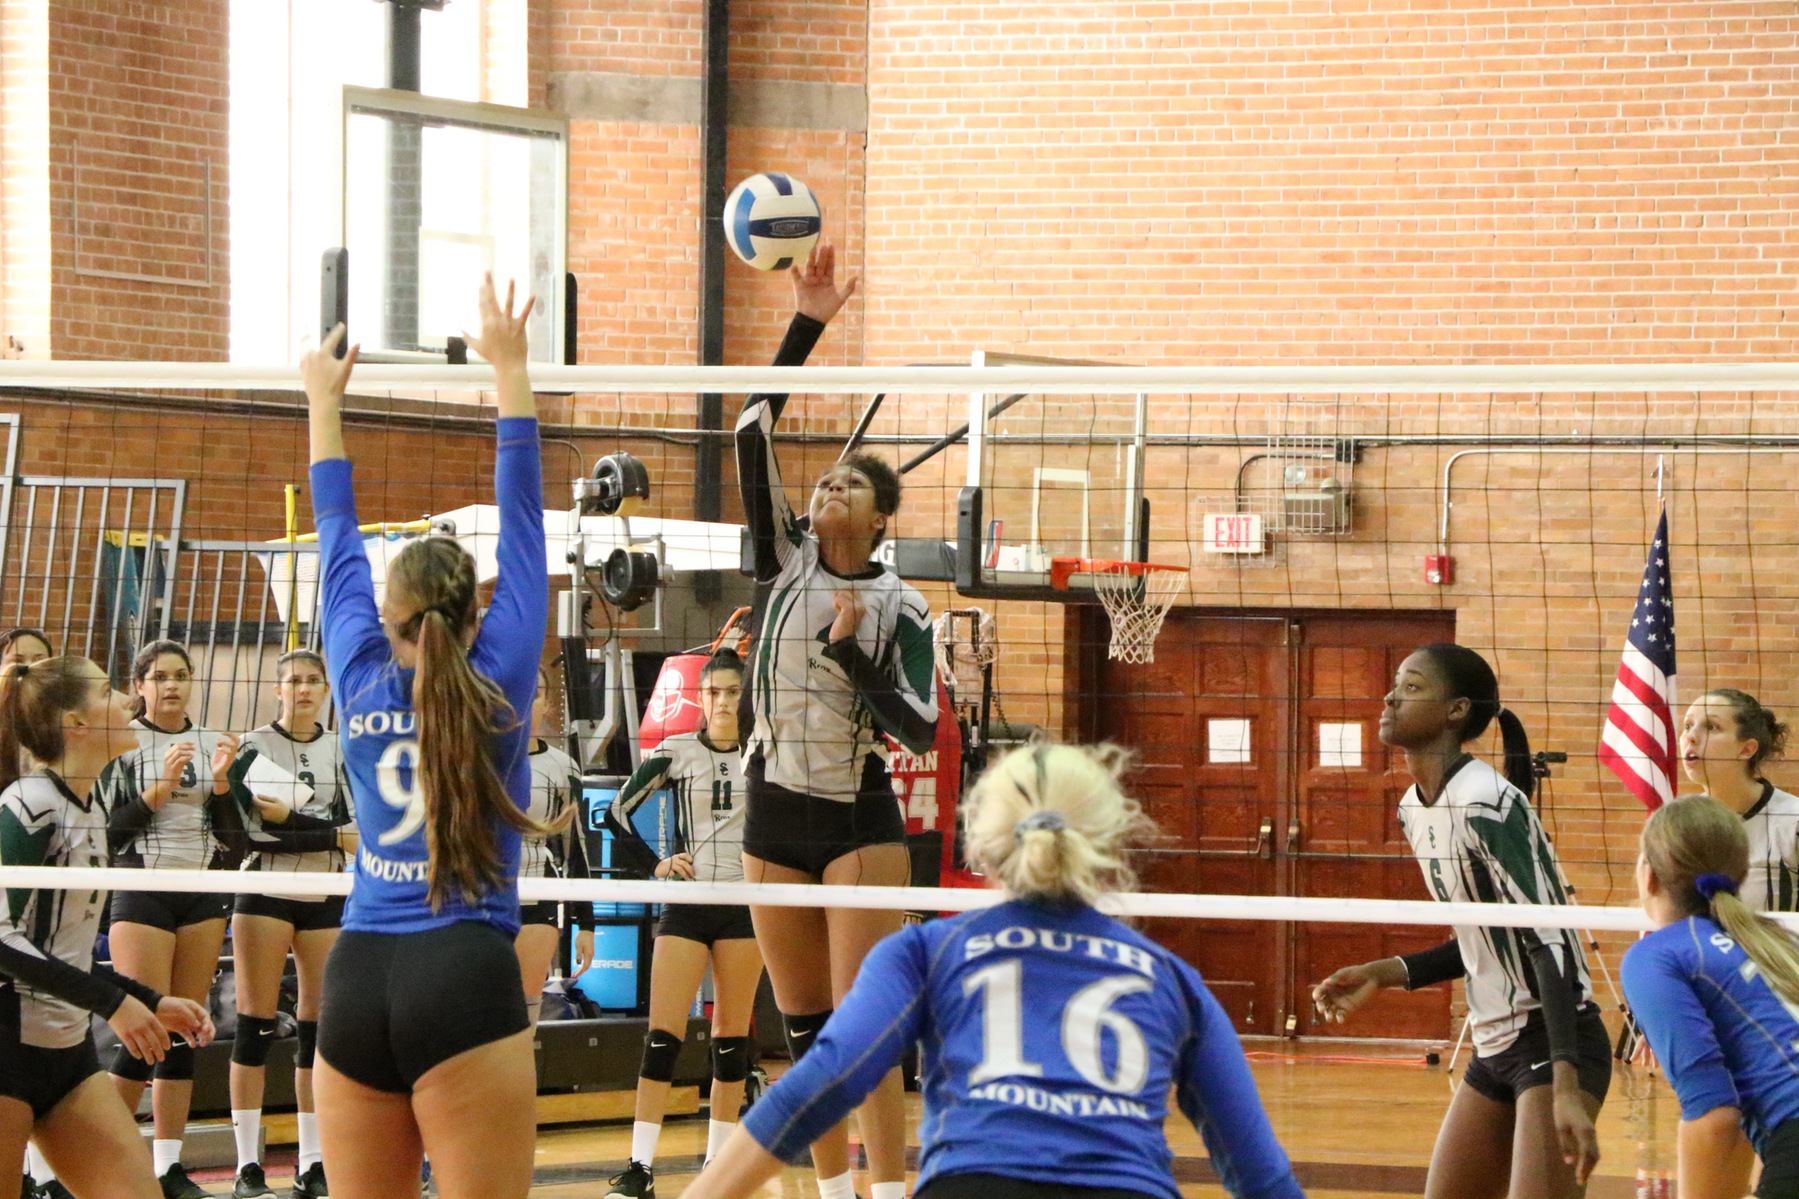 Yanlis Feliz goes up for a kill in set two, versus South Mountain Community College